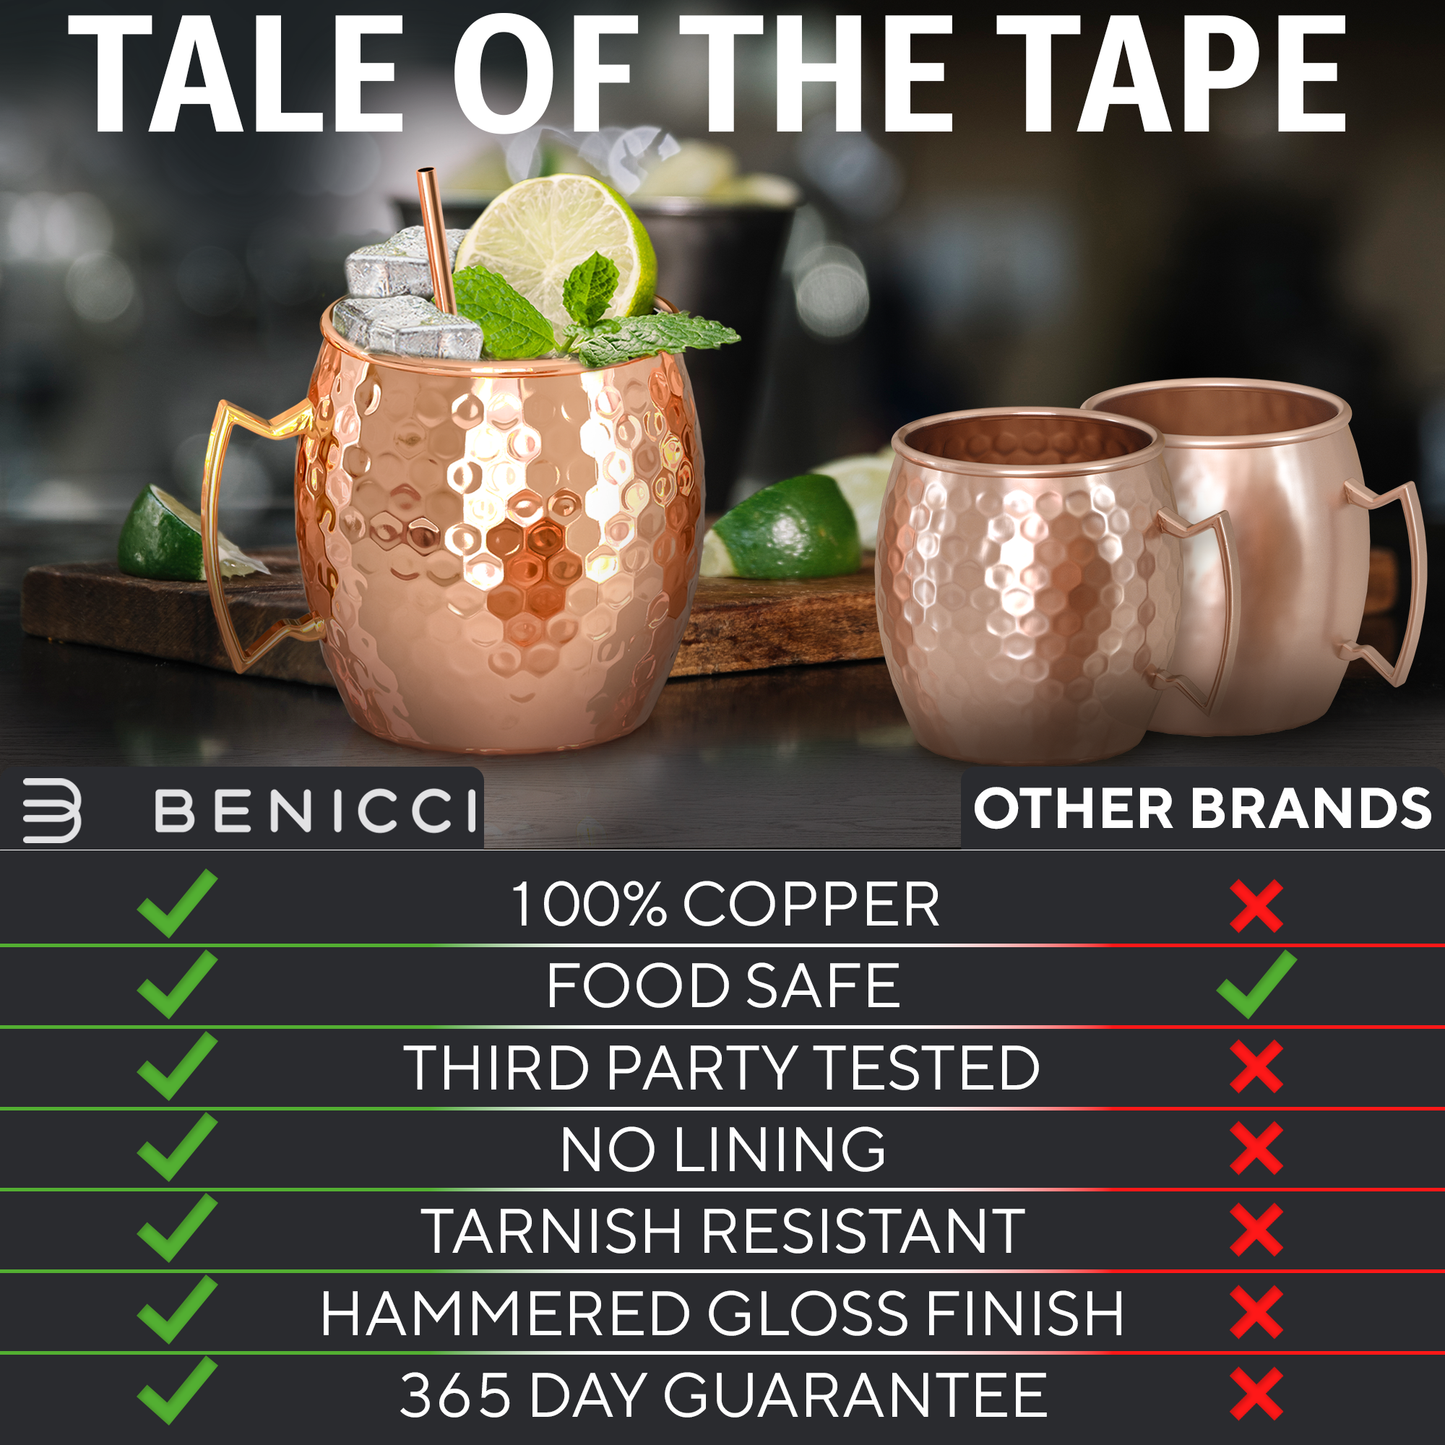 Moscow Mule Copper Mugs - Set of 4 - 100% HANDCRAFTED - Food Safe Pure Solid Copper Mugs - 16 oz Gift Set with BONUS: Highest Quality Cocktail Copper